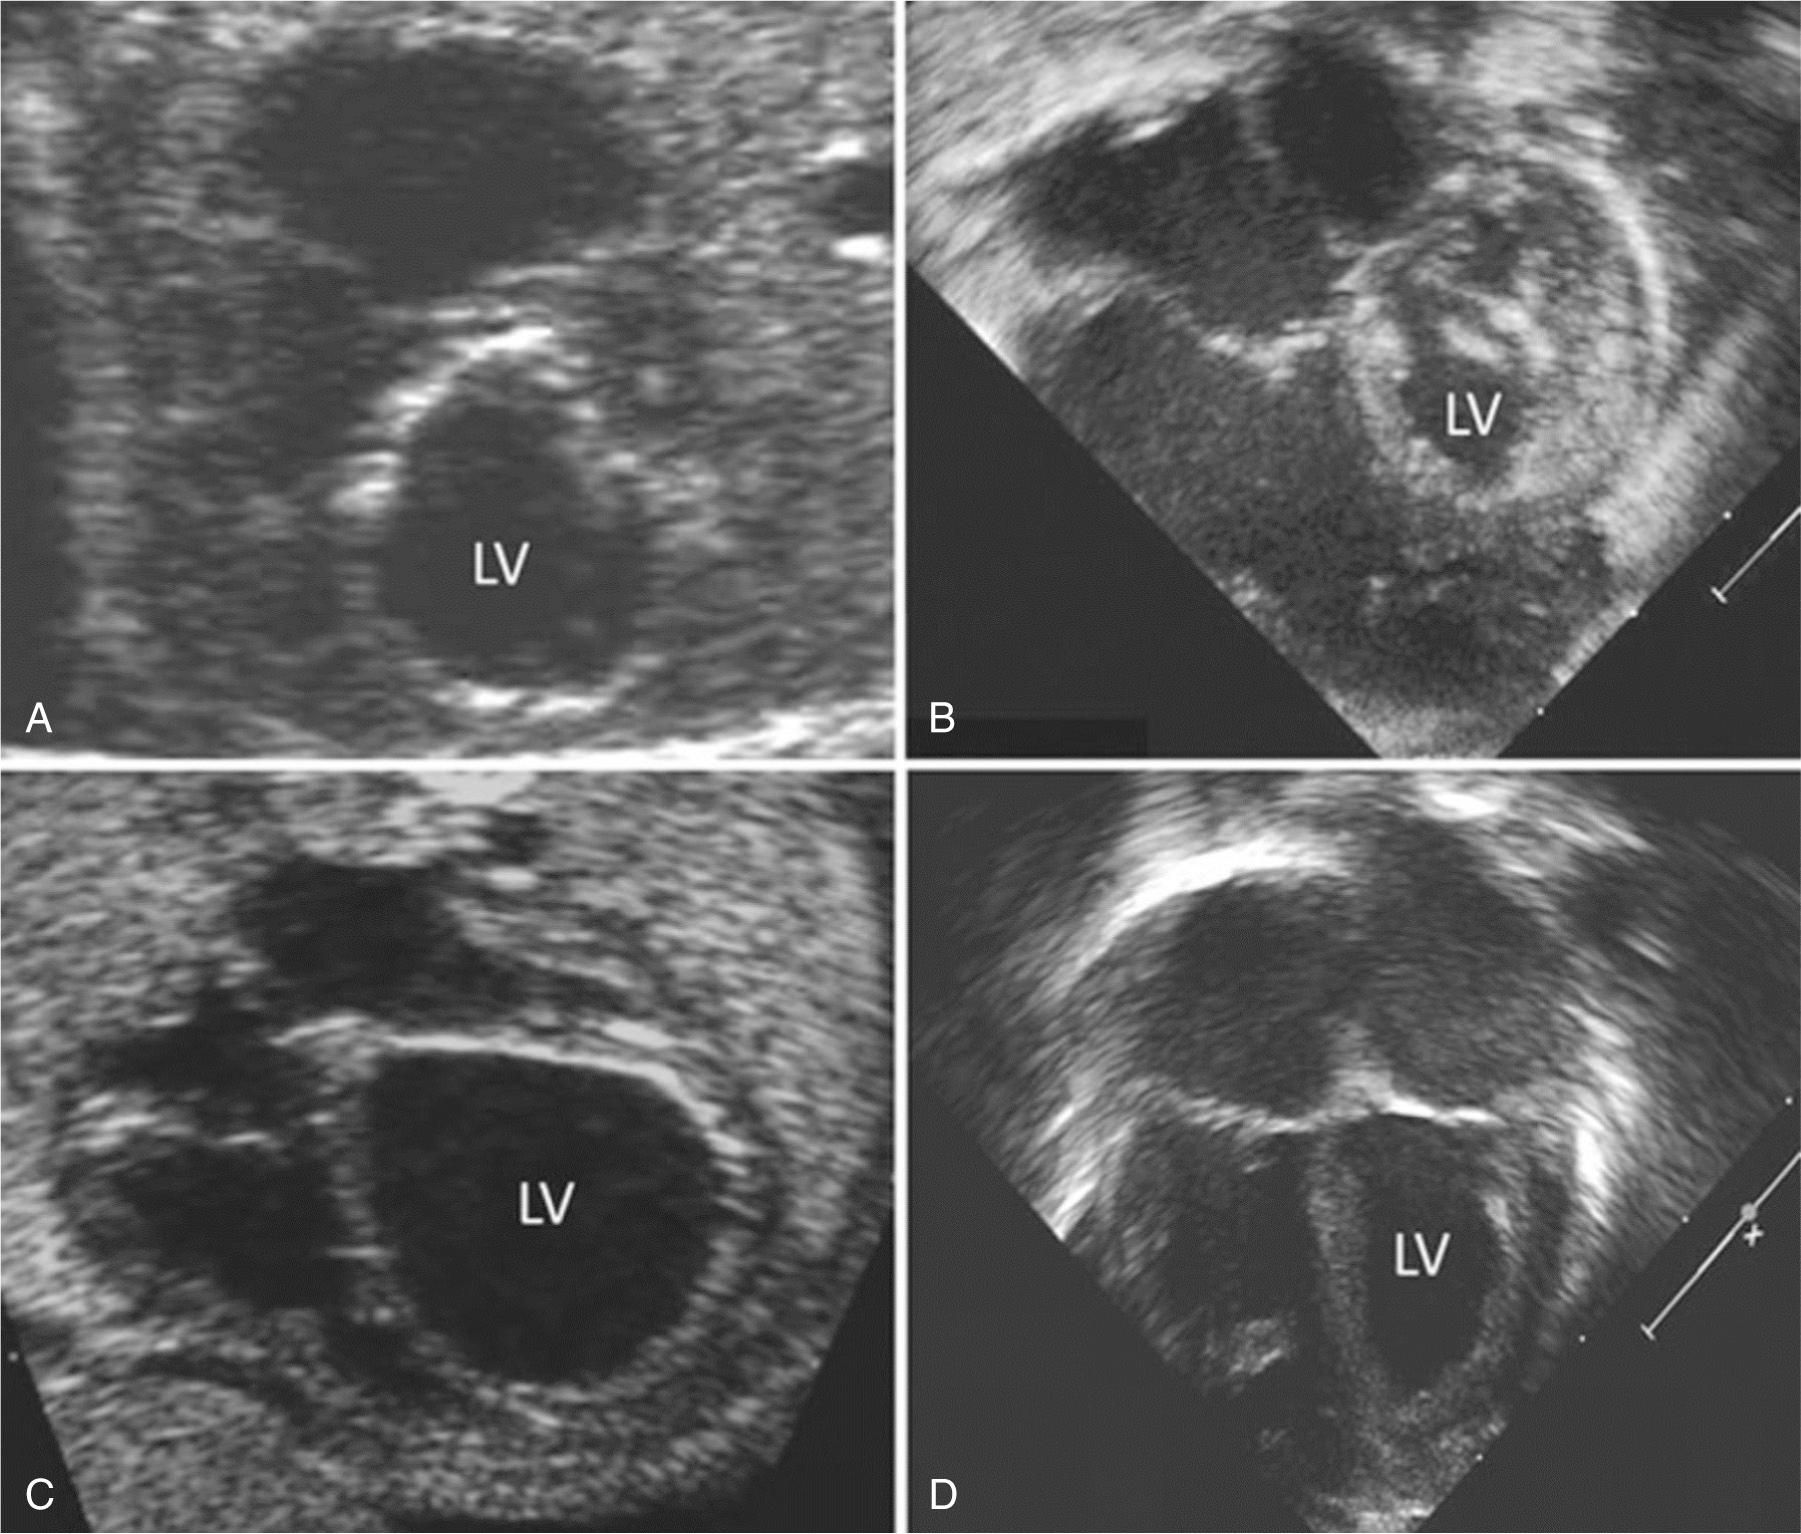 Fig. 10.6, Four-chamber views of the heart in two patients, with the preintervention fetal echocardiograms on the left and the postnatal echocardiograms on the right. (A–B) This patient had a technically unsuccessful fetal aortic valvuloplasty and was managed with staged univentricular palliation after birth. (C–D) This patient had a technically successful procedure and a biventricular outcome. LV, Left ventricle.